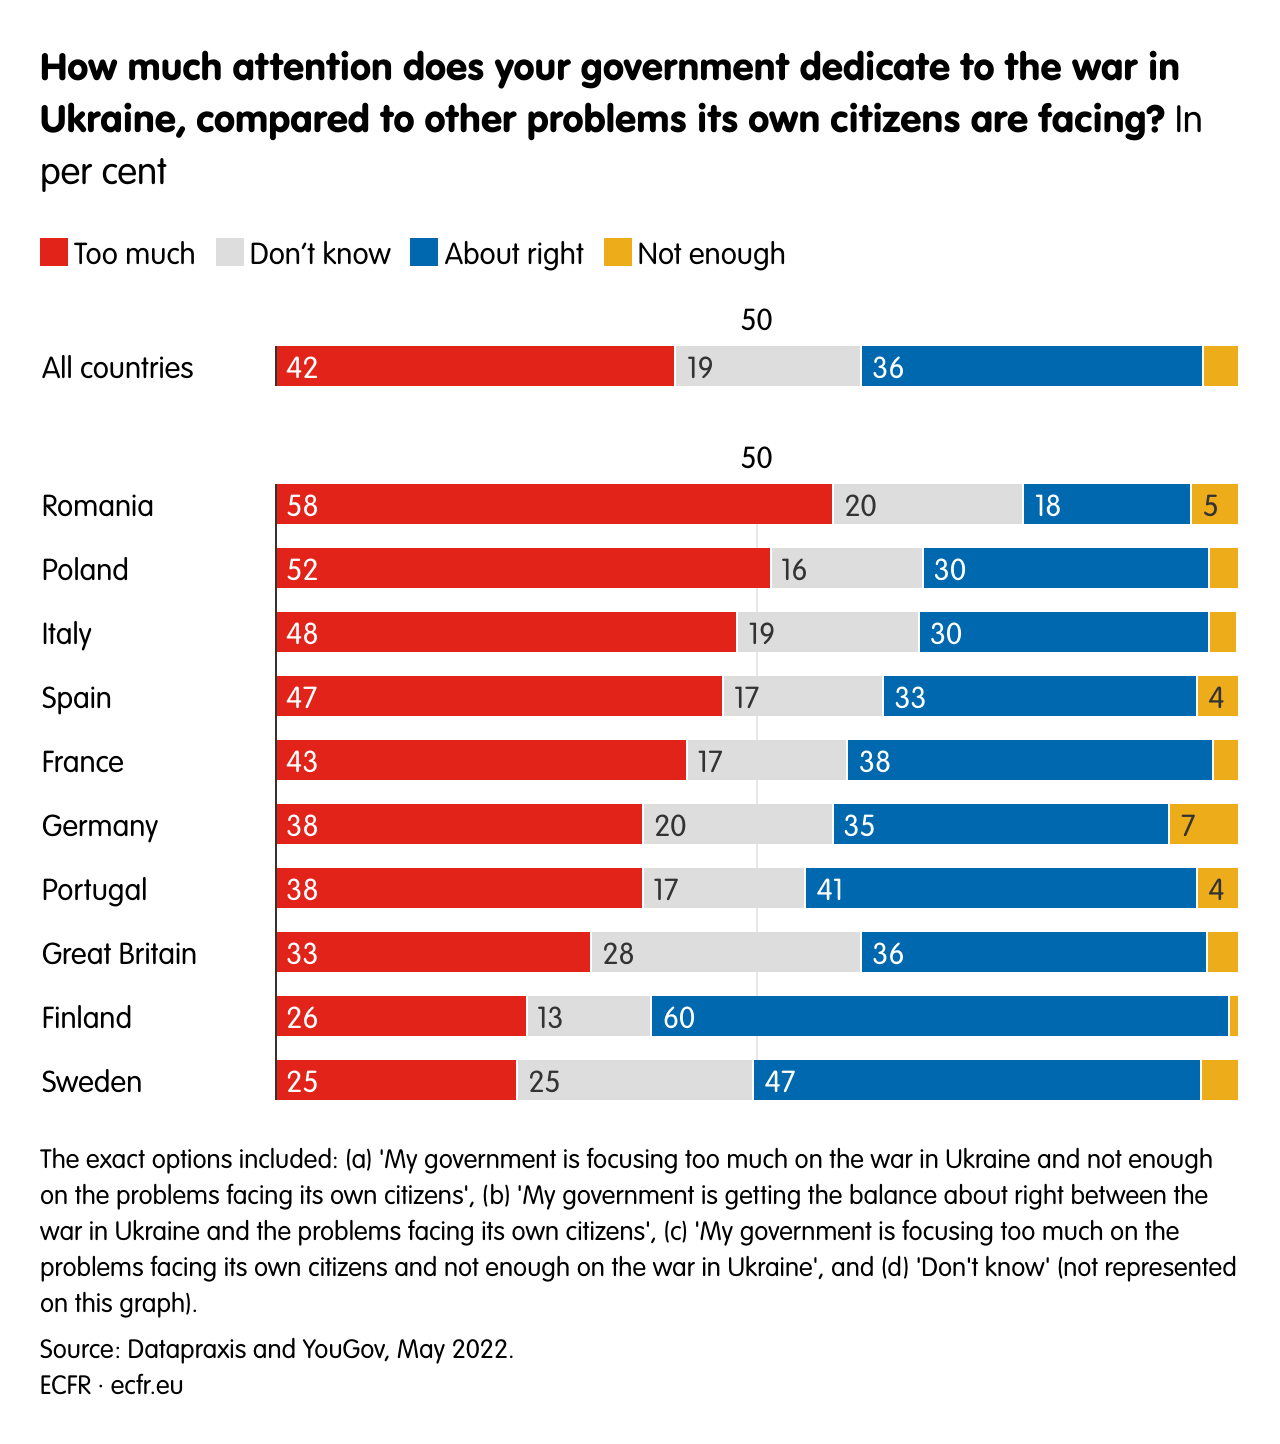 How much attention does your government dedicate to the war in Ukraine, compared to other problems its own citizens are facing? 